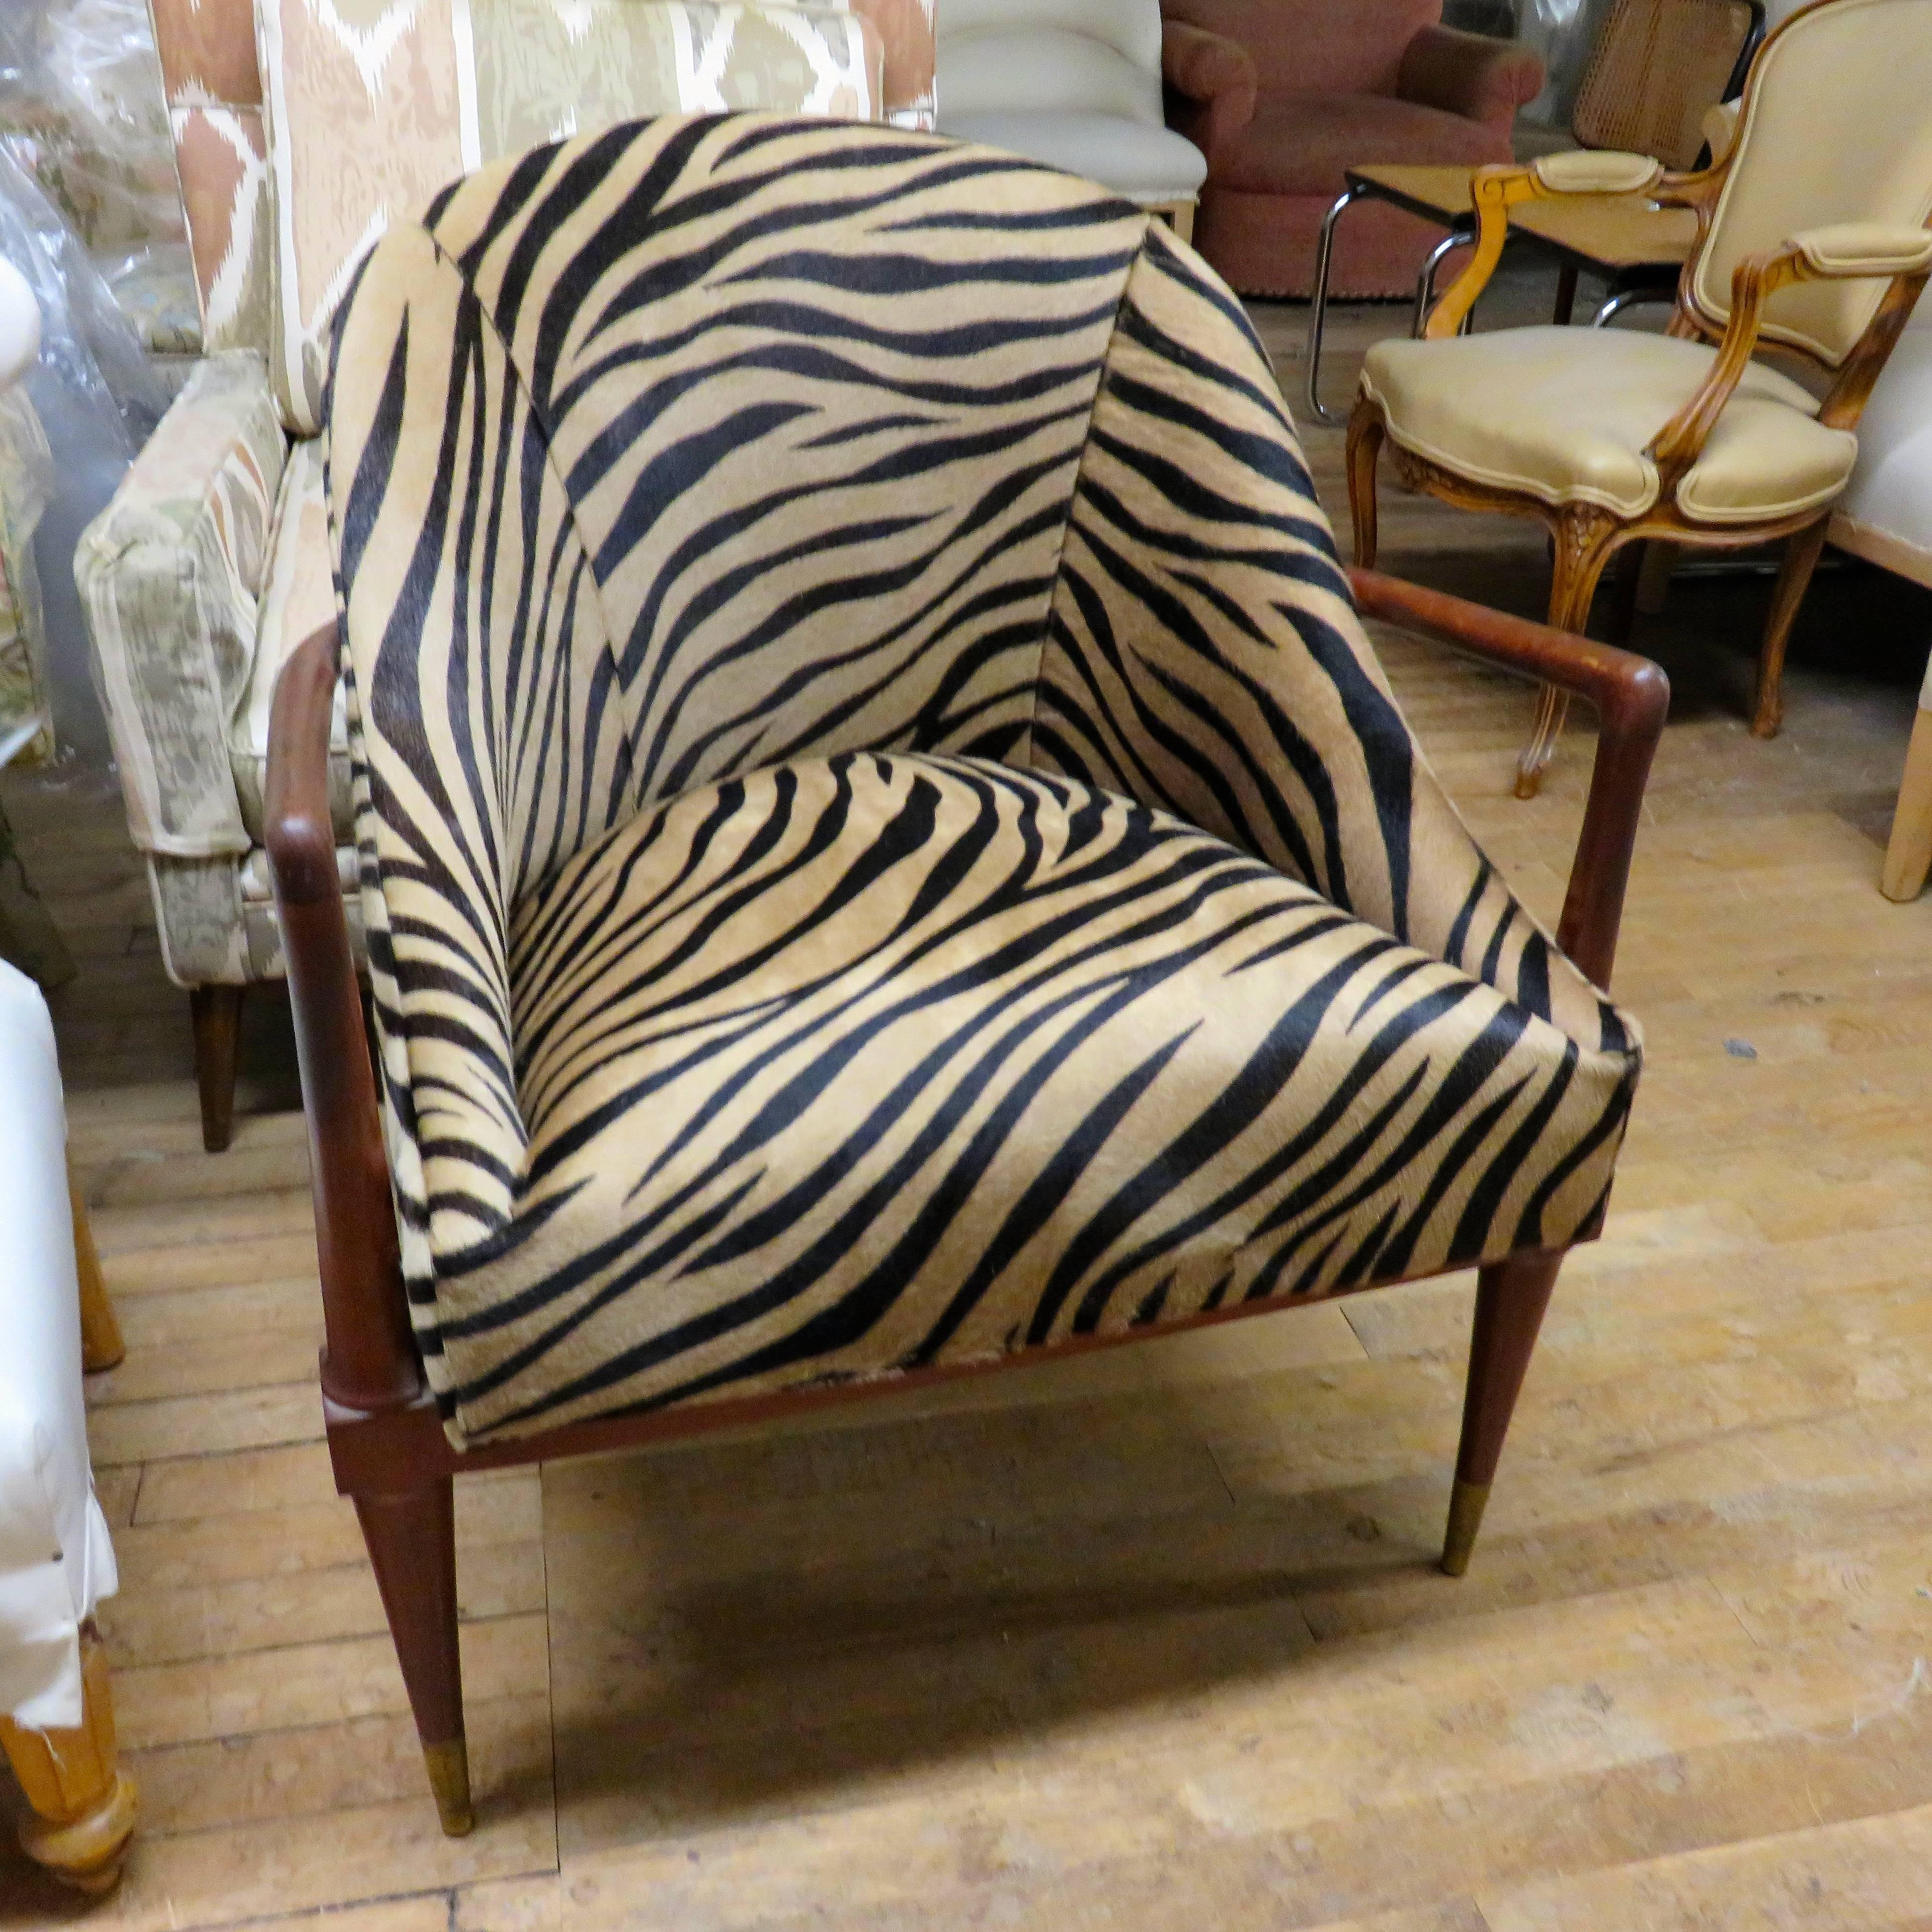 Stunningly handsome single arm chair in the style of T. H. Robsjohn Gibbings with sculptural solid walnut frames, curved seat back, sloping sides and high brass sabots. 

Newly reupholstered in zebra printed cowhide.